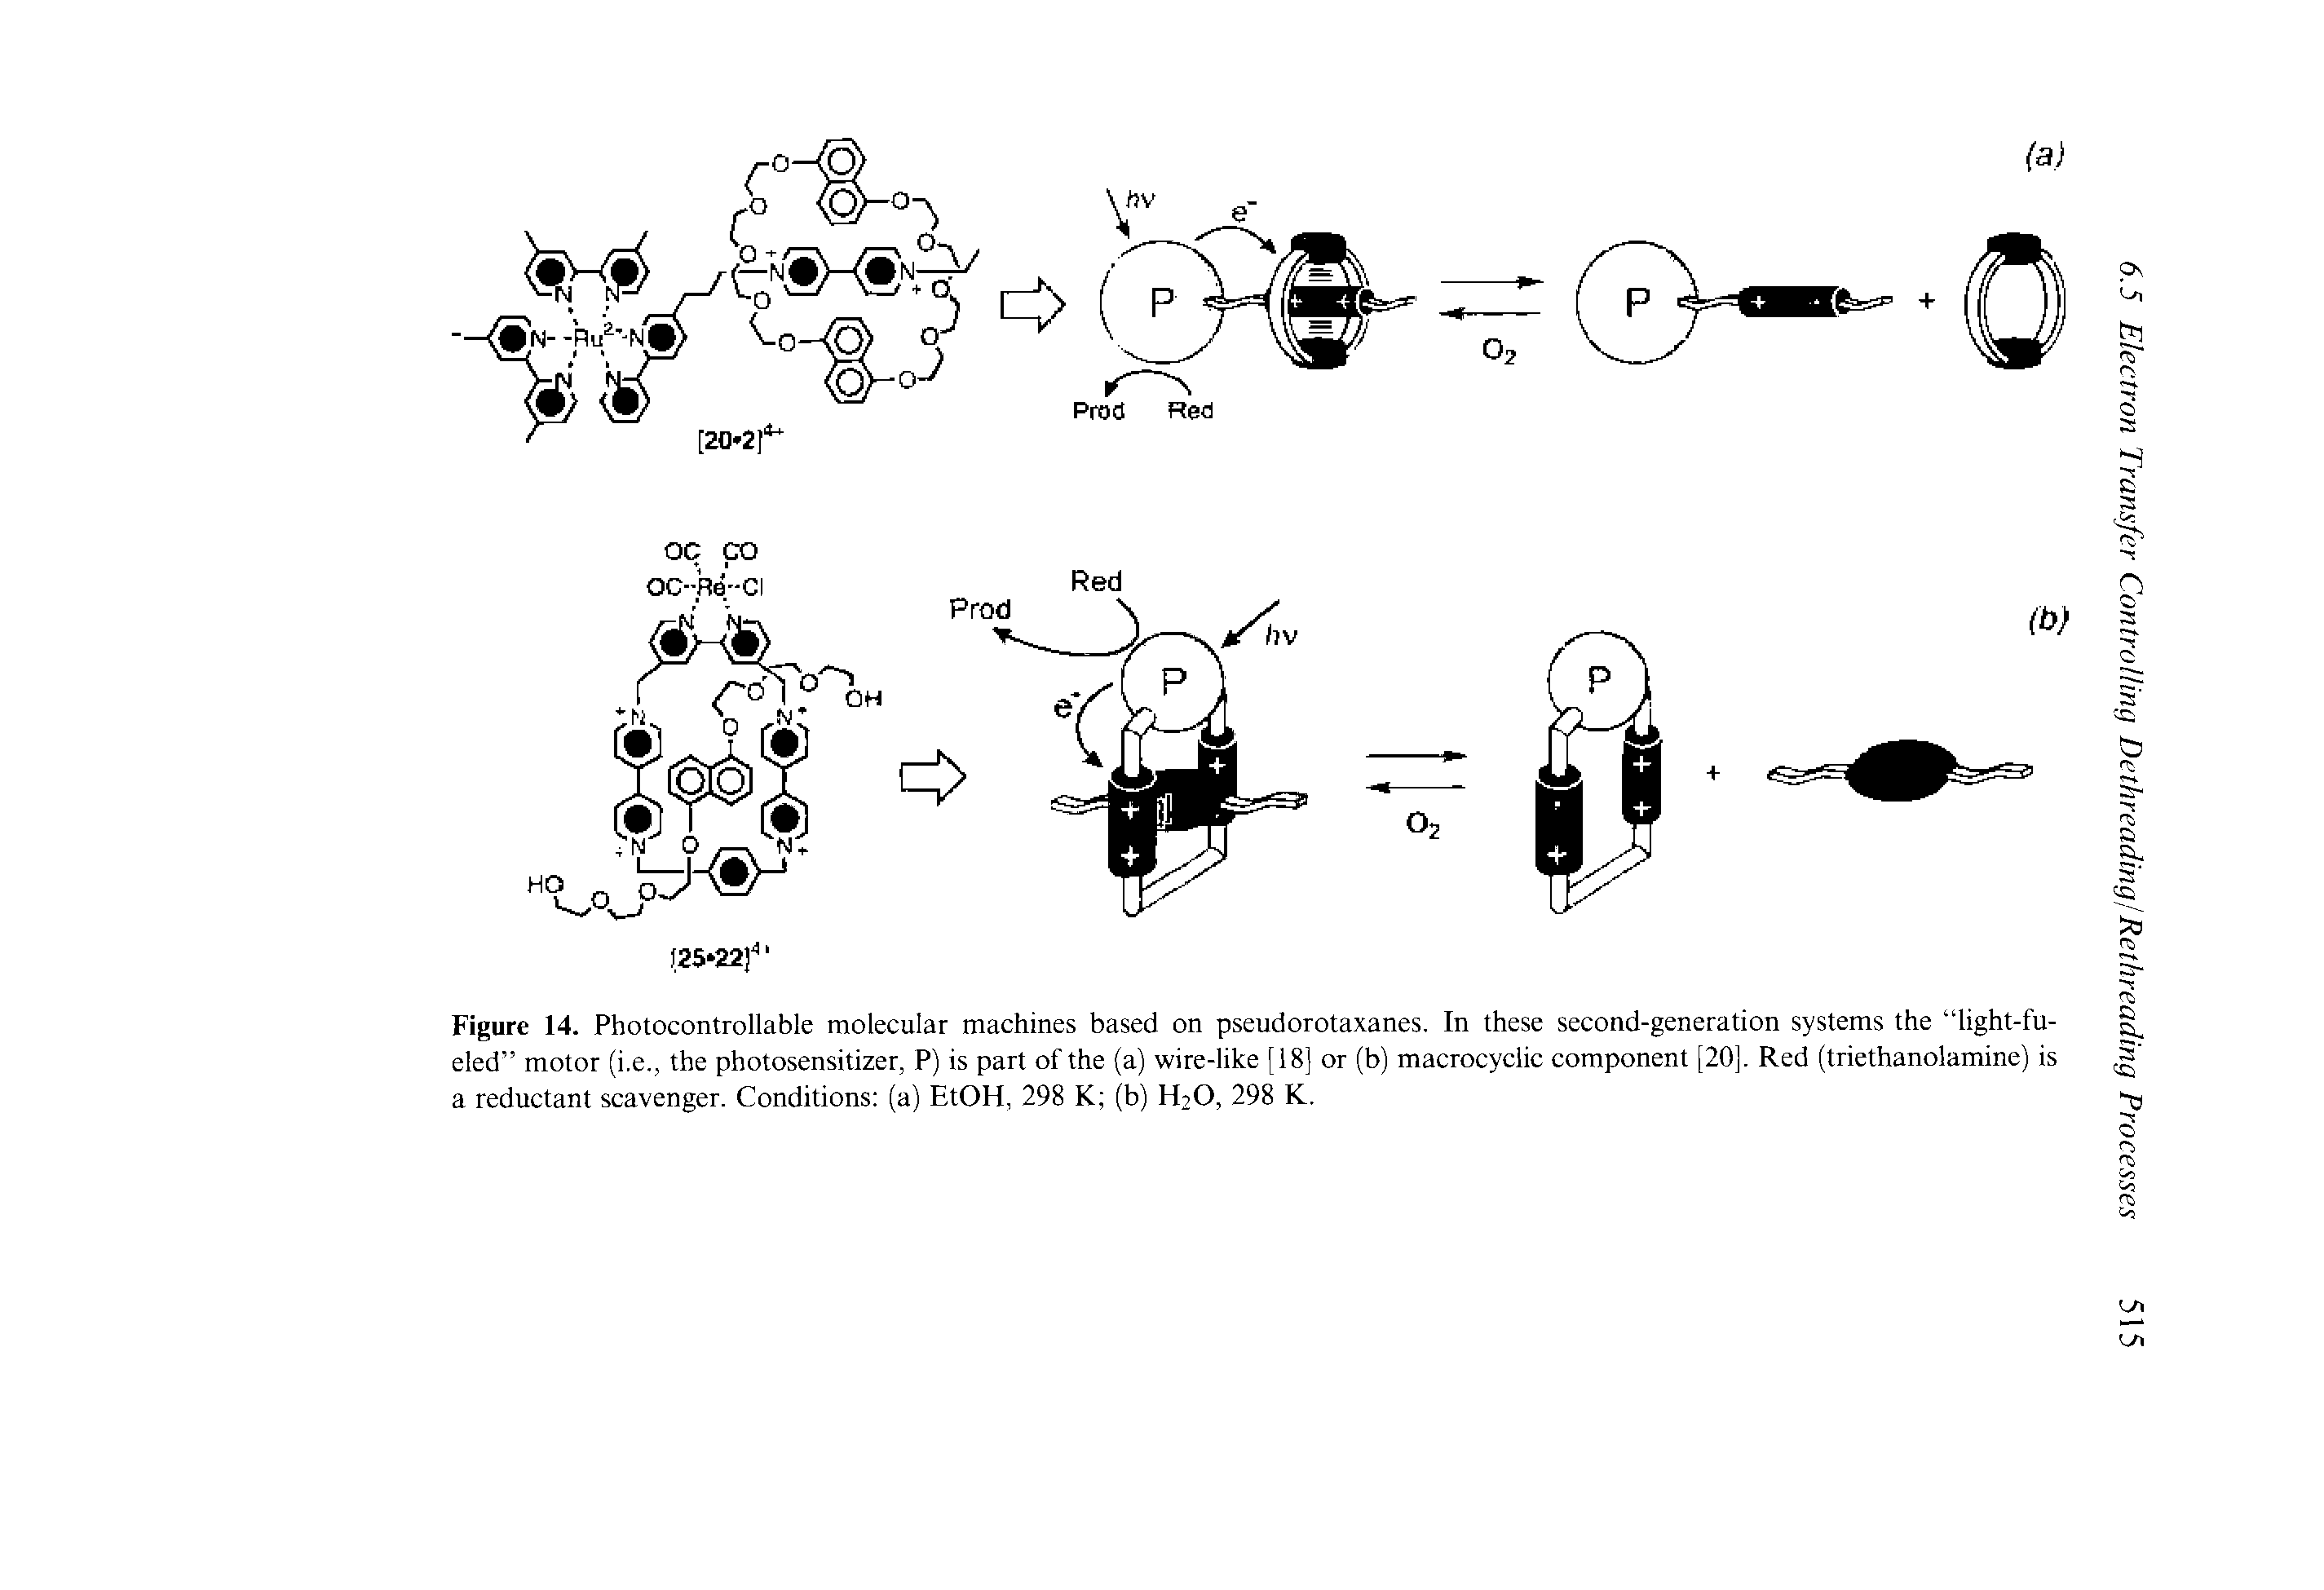 Figure 14. Photocontrollable molecular machines based on pseudorotaxanes. In these second-generation systems the light-fueled motor (i.e., the photosensitizer, P) is part of the (a) wire-like [18] or (b) macrocyclic component [20], Red (triethanolamine) is a reductant scavenger. Conditions (a) EtOH, 298 K (b) H2O, 298 K.